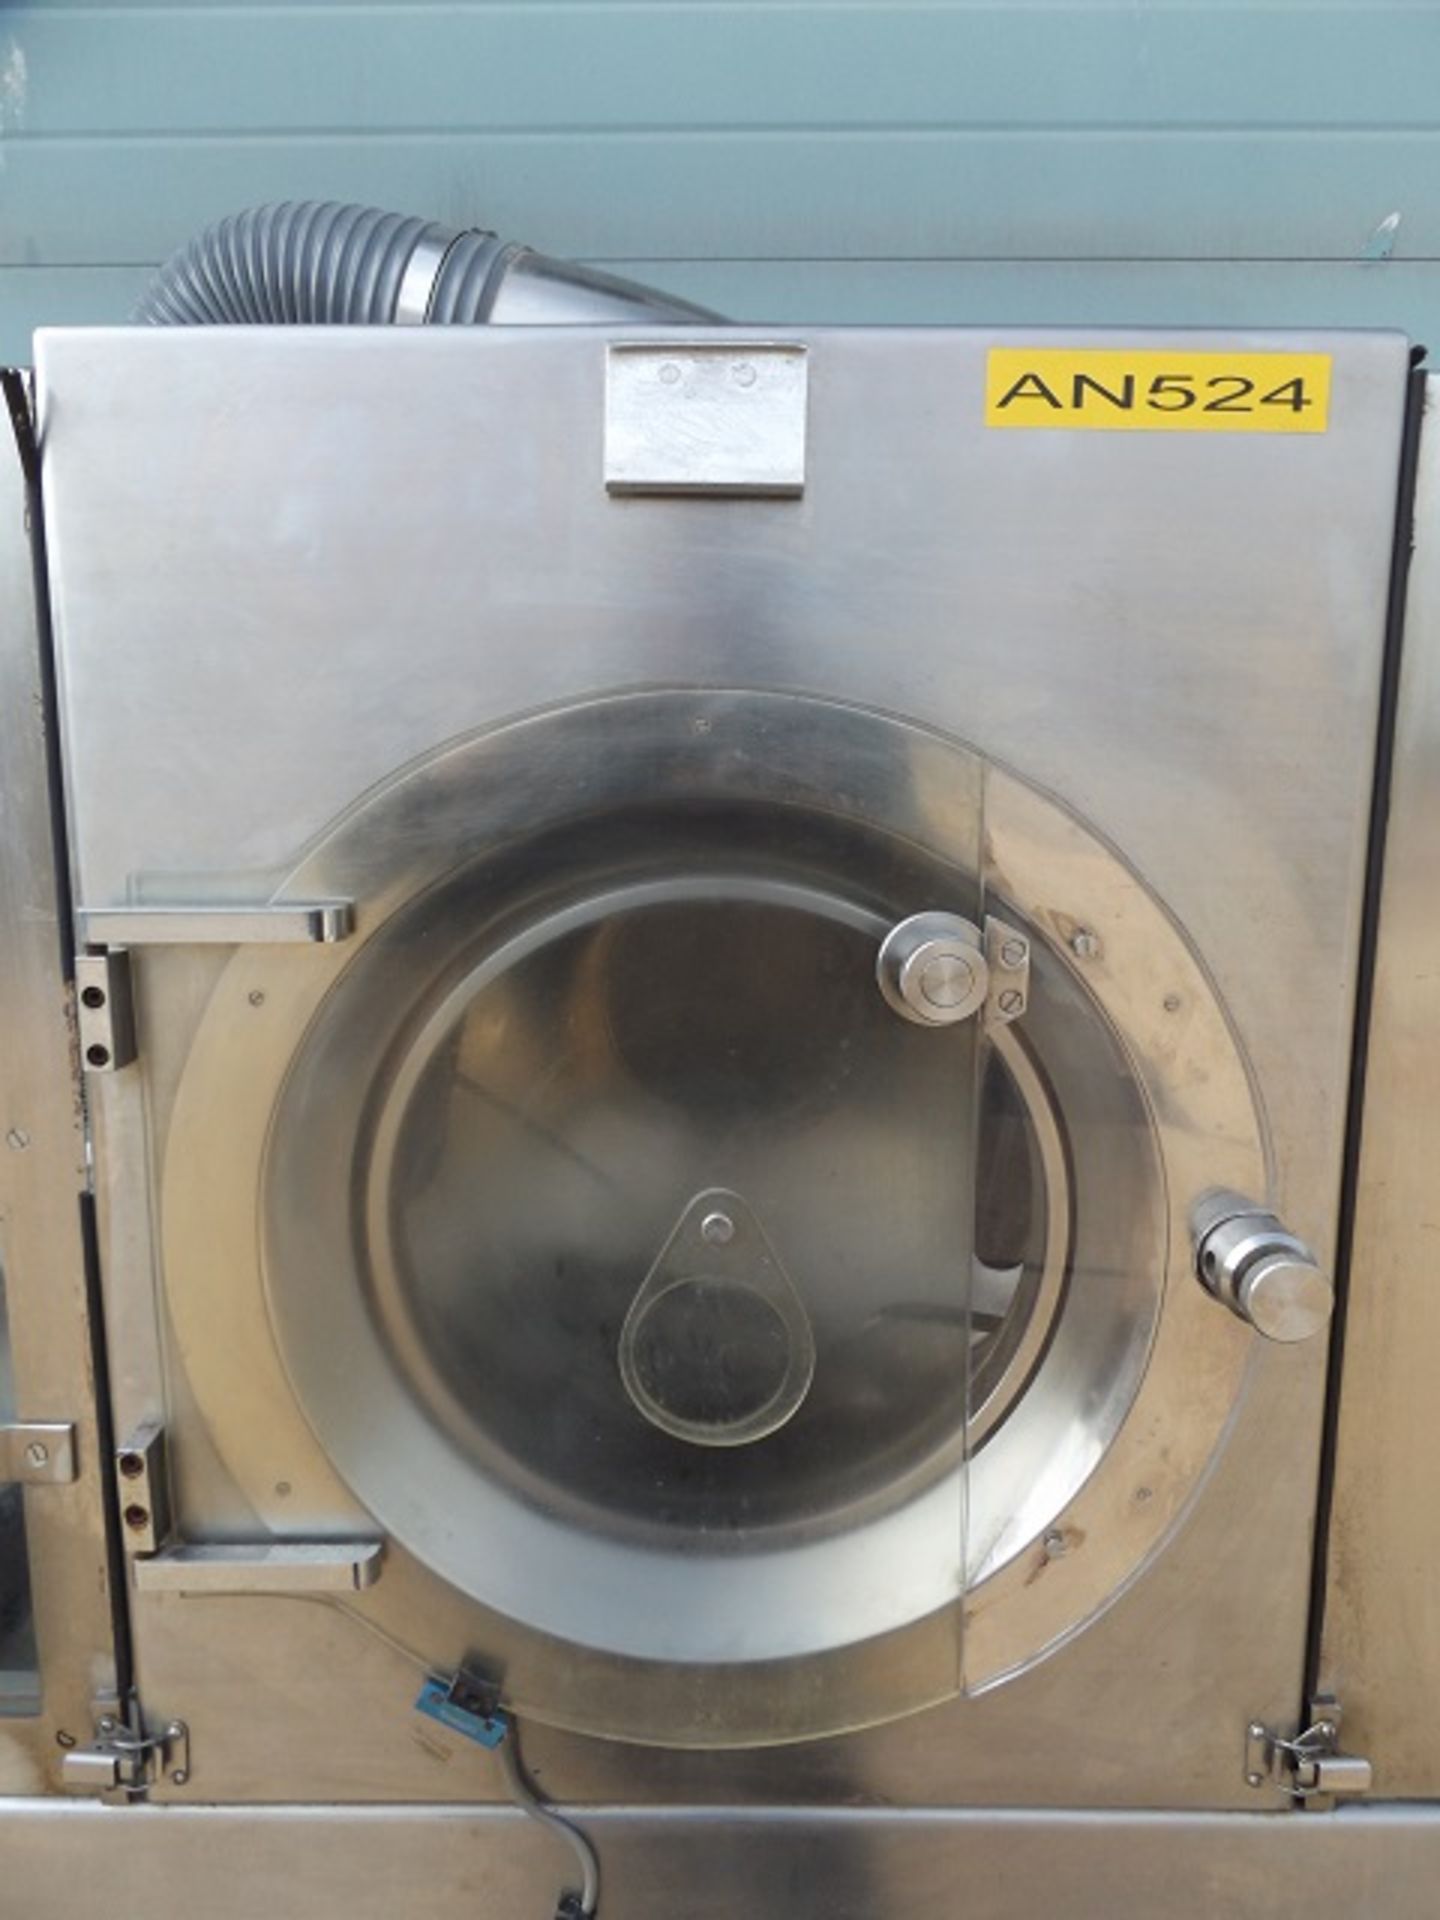 Manesty model Accelacota 10 small batch size tablet coating unit with air handling system. - Image 7 of 15